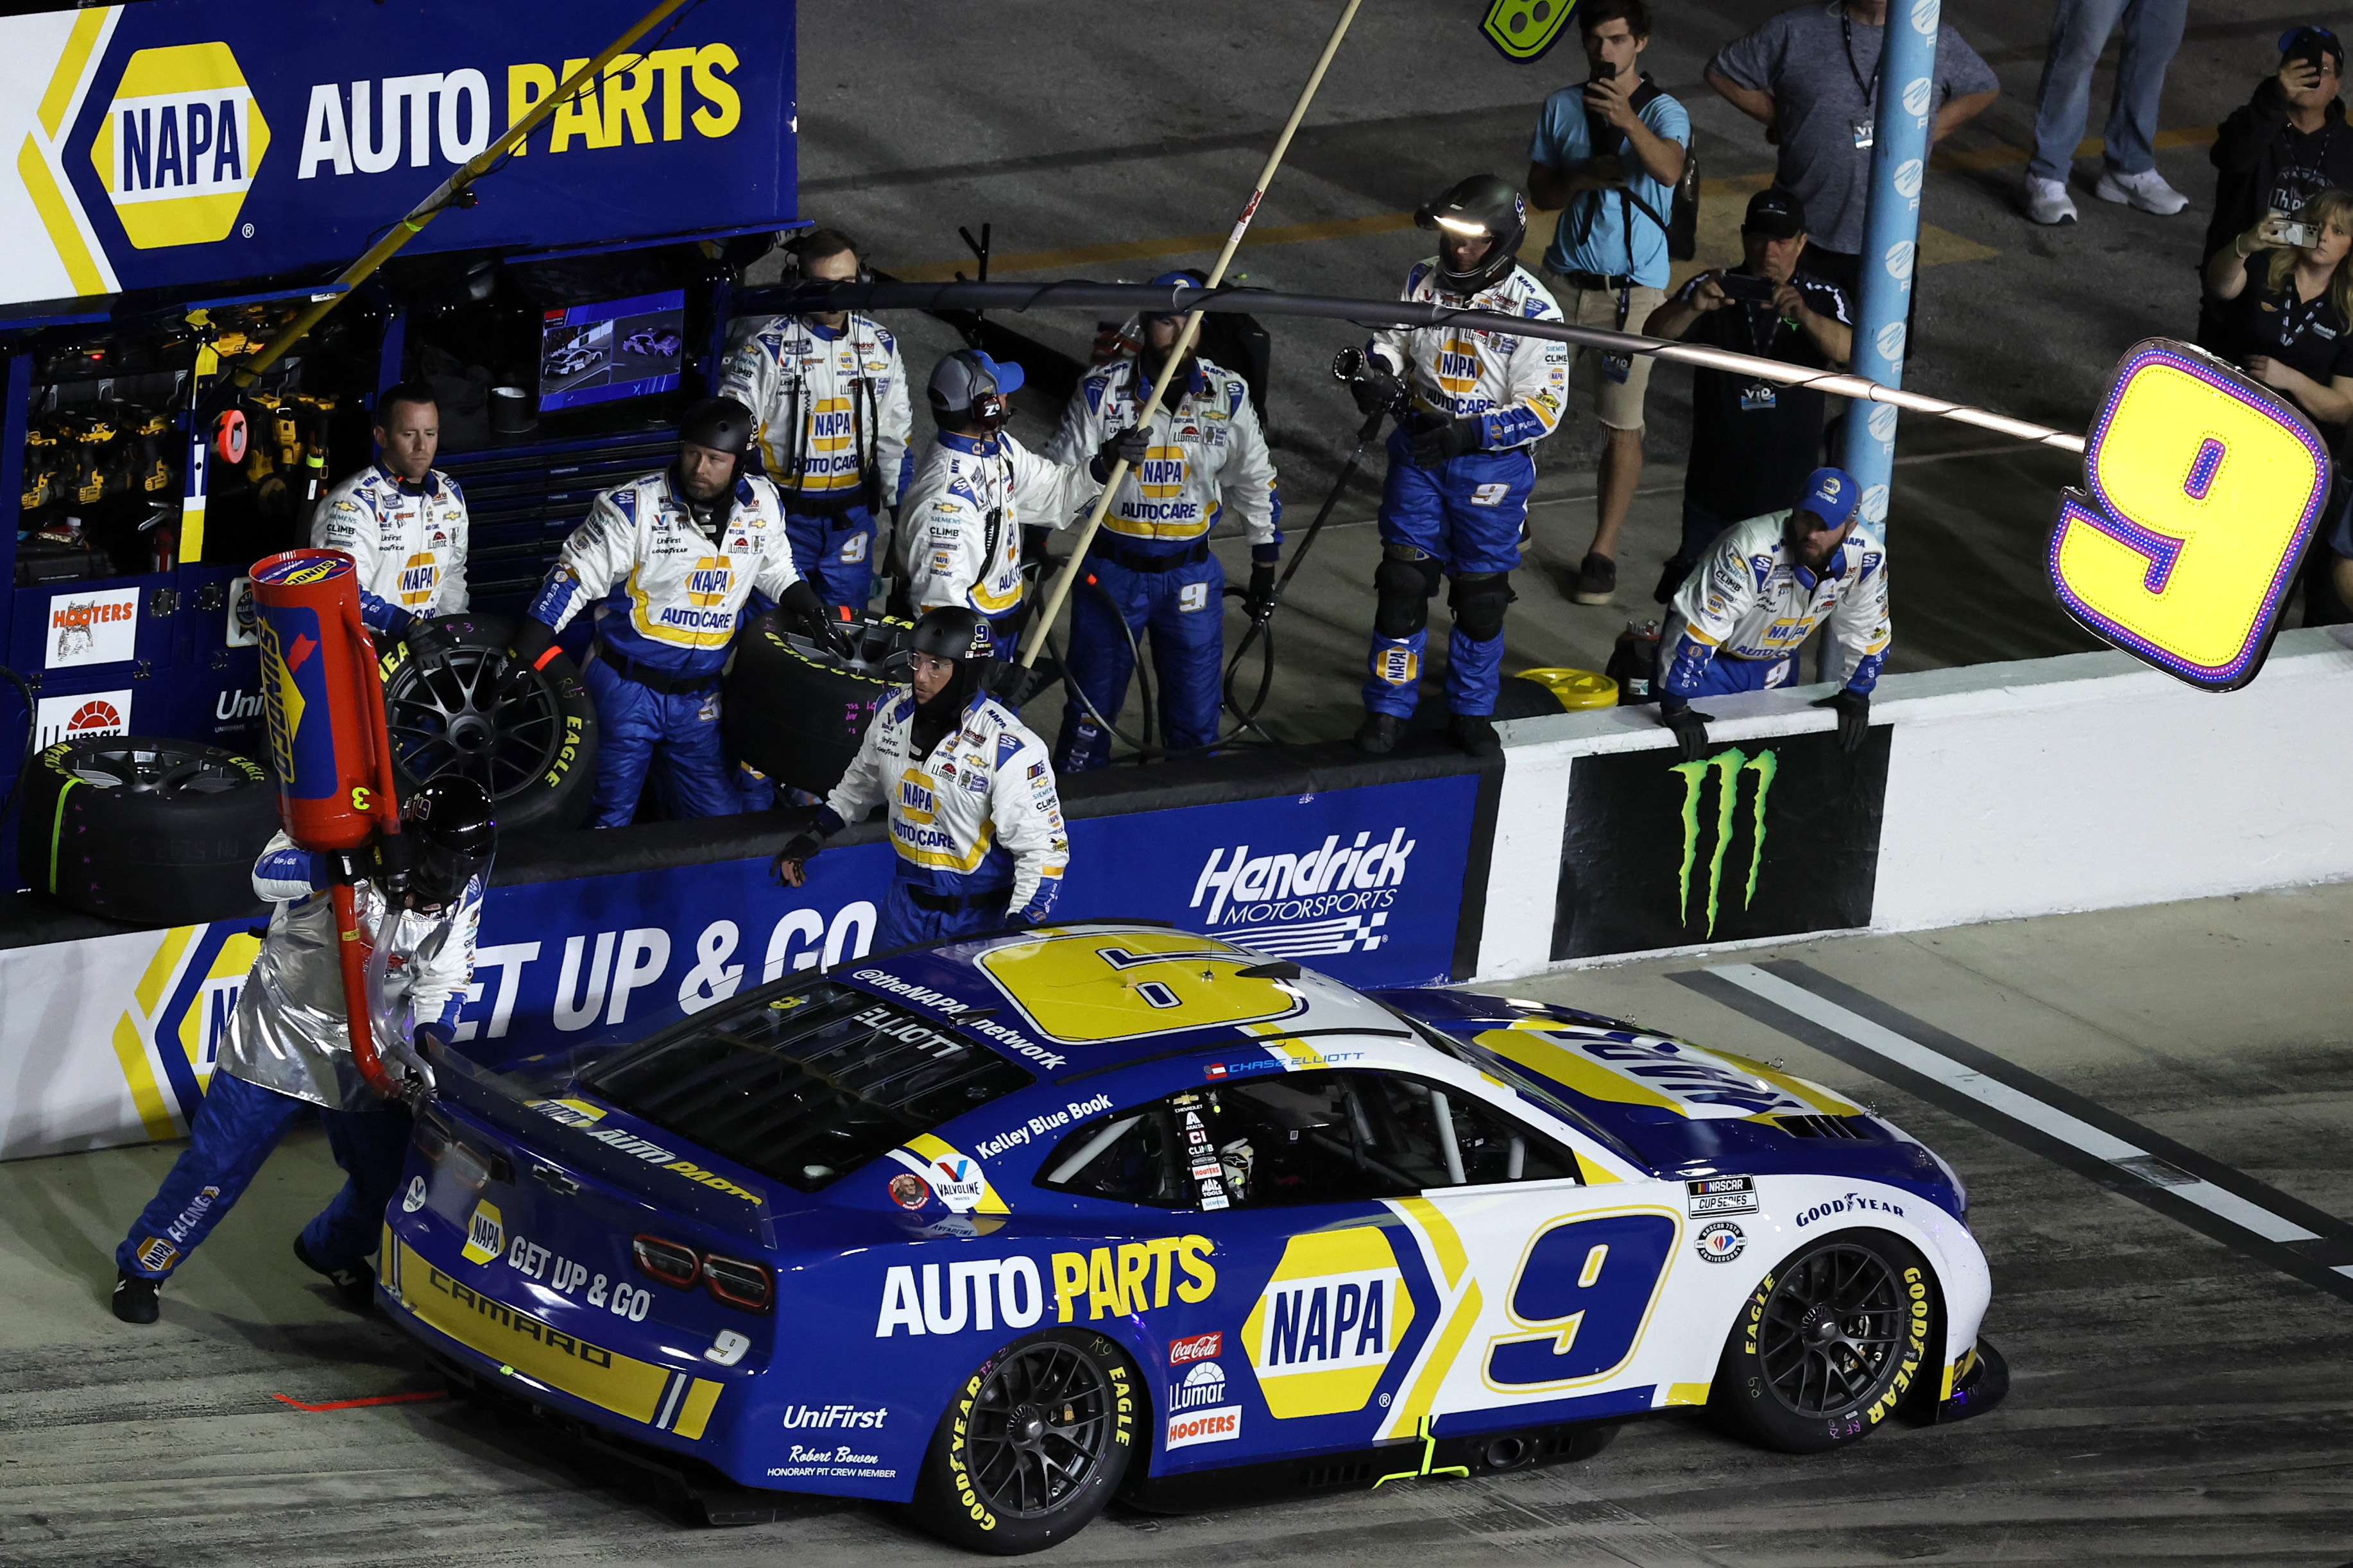 Chase Elliott, driver of the #9 NAPA Auto Parts Chevrolet, pits during the NASCAR Cup Series Bluegreen Vacations Duel #2 at Daytona International Speedway on February 16, 2023 in Daytona Beach, Florida.